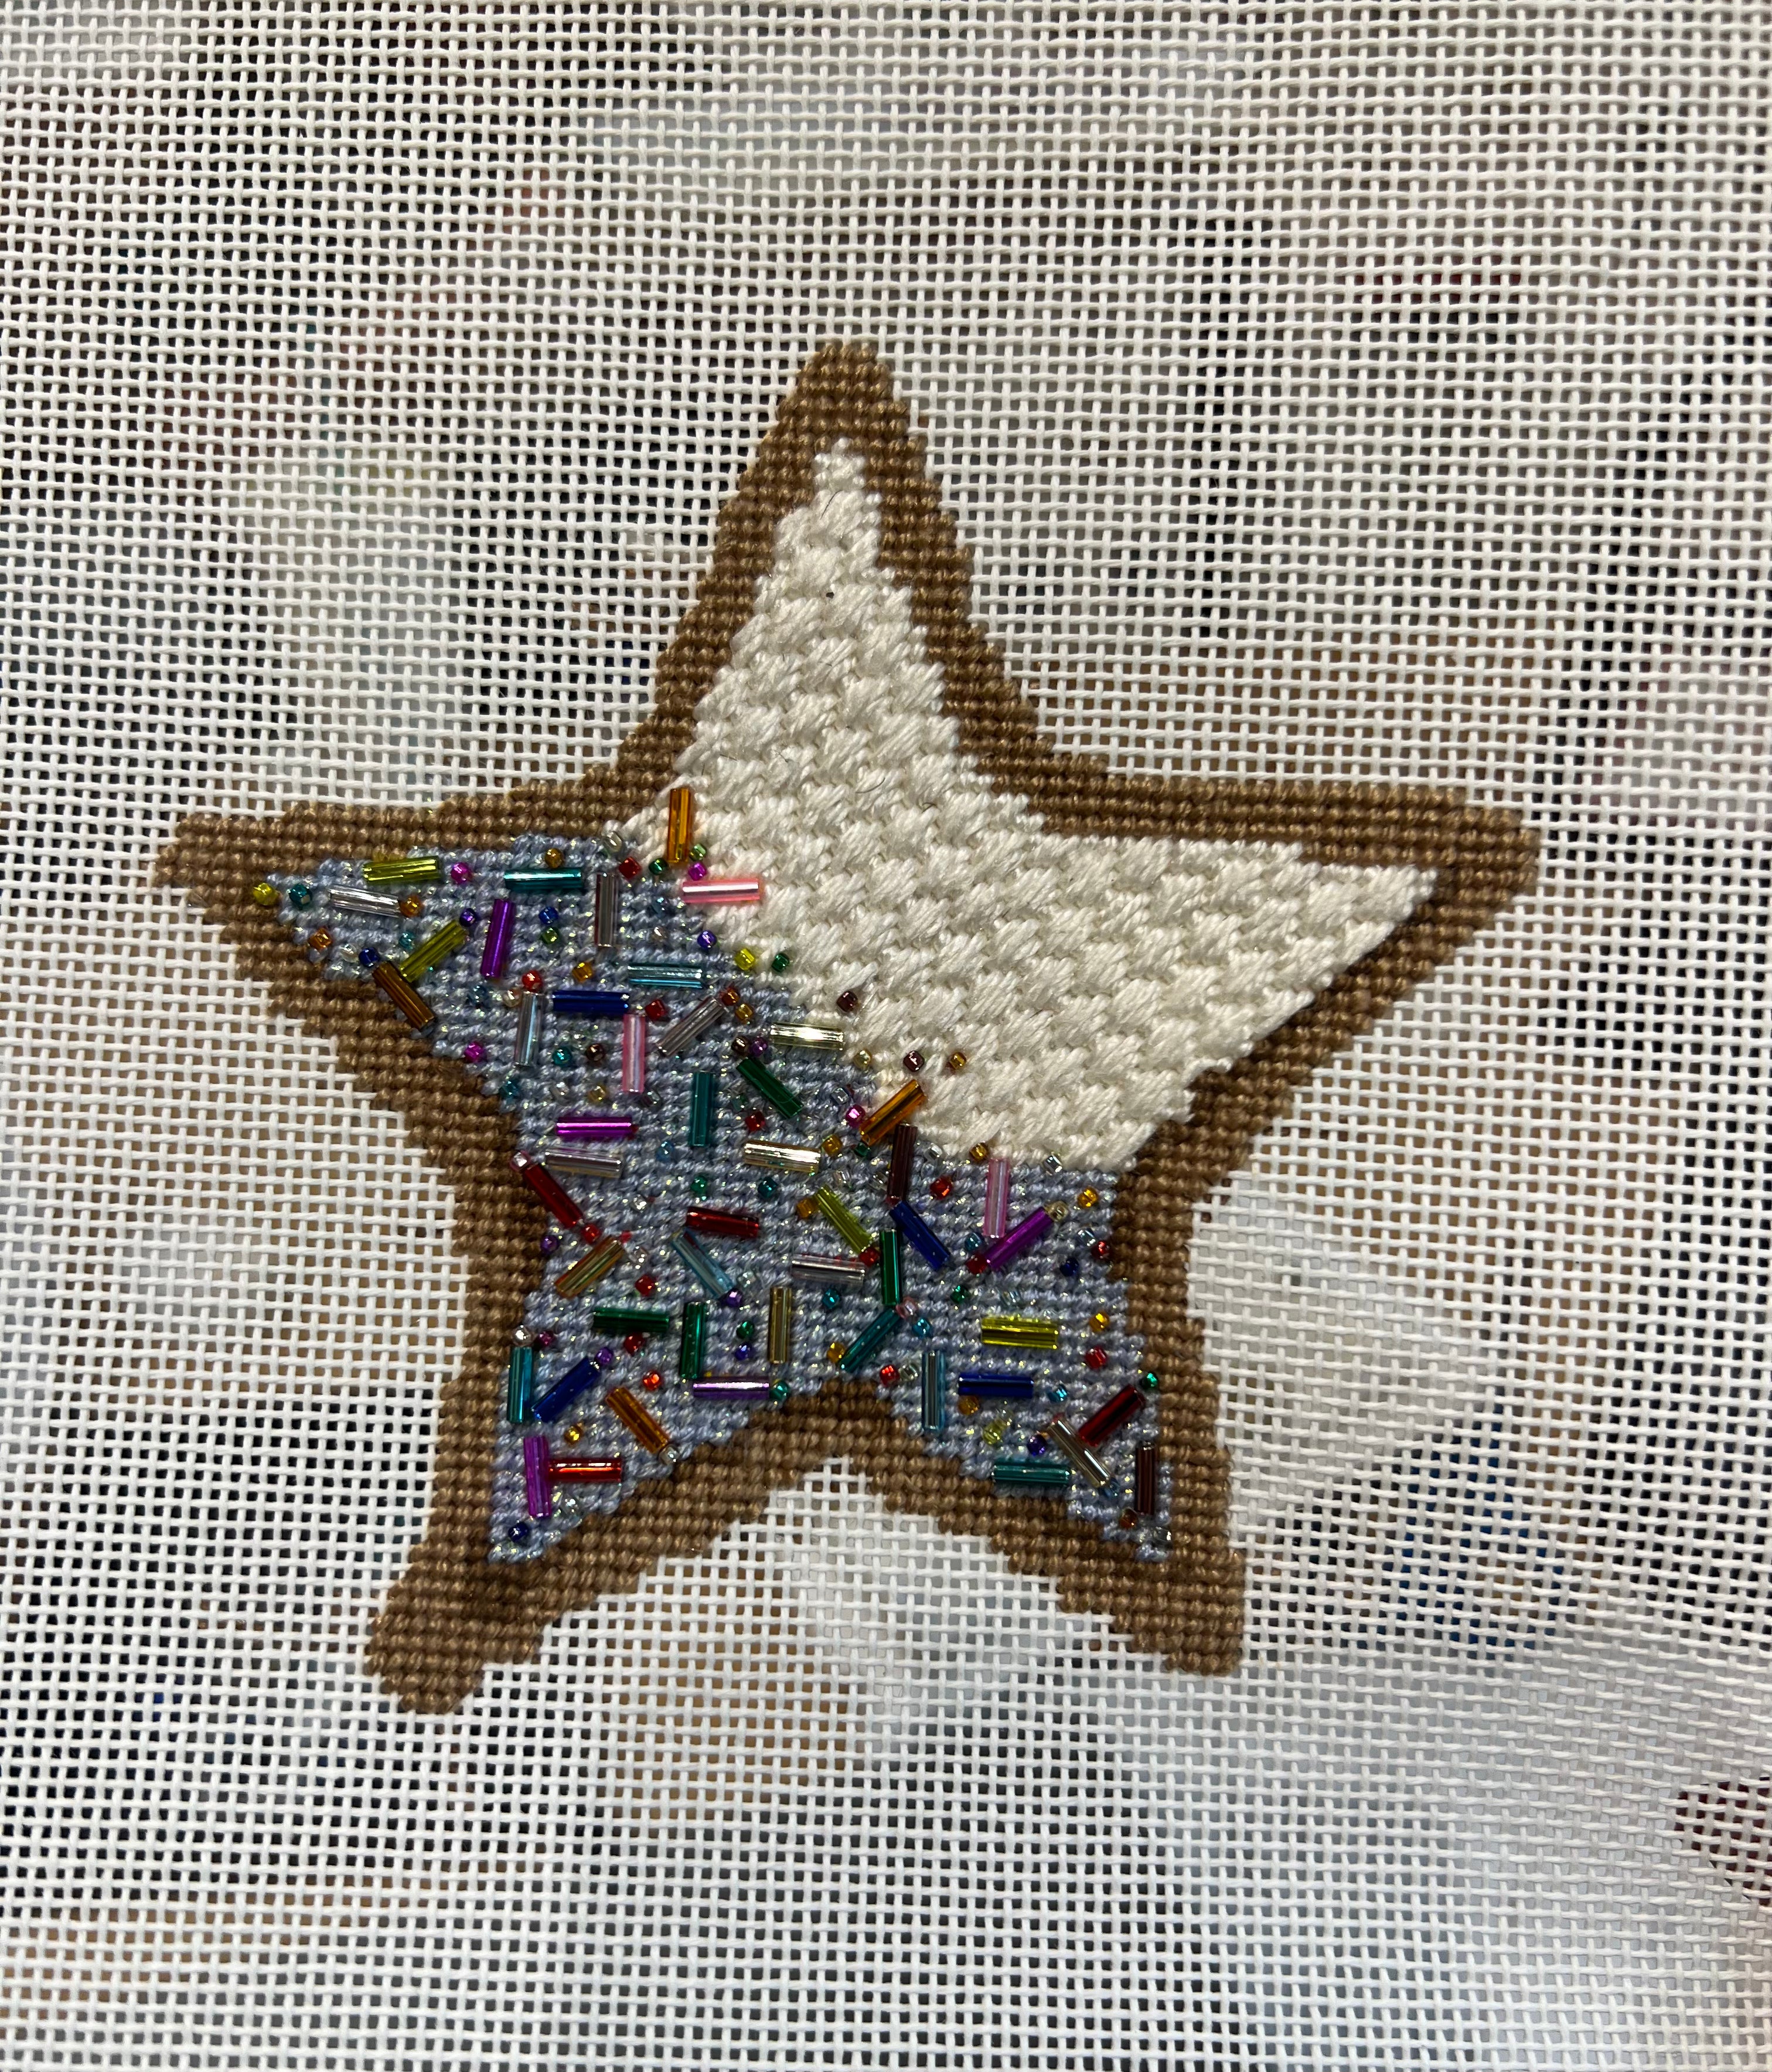 Star Cookie Kit by Laura Love Designs